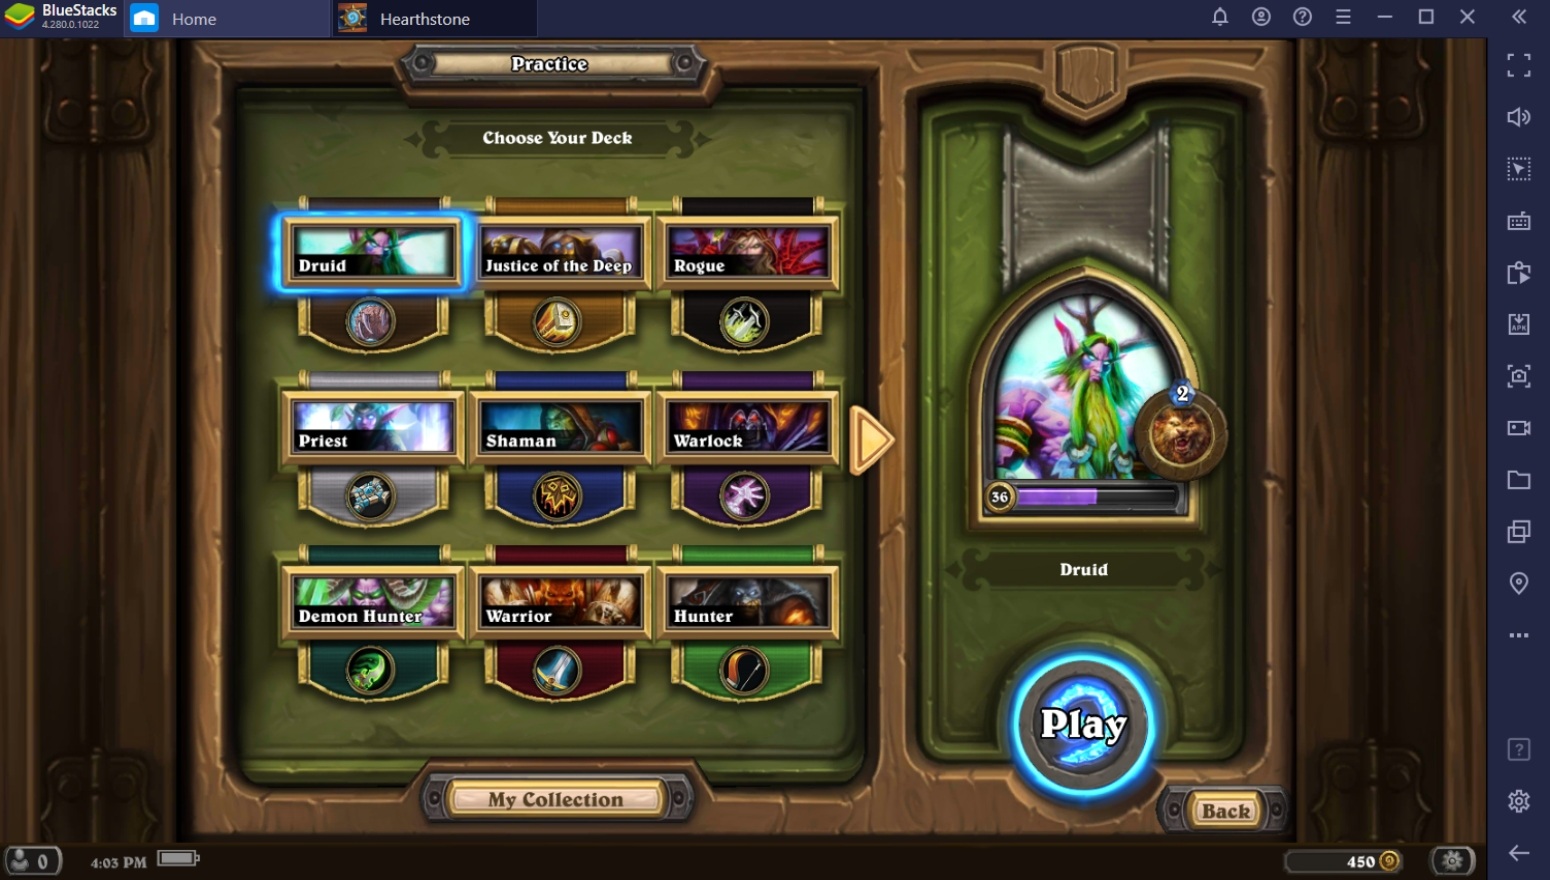 BlueStacks' Beginners Guide to Playing Hearthstone